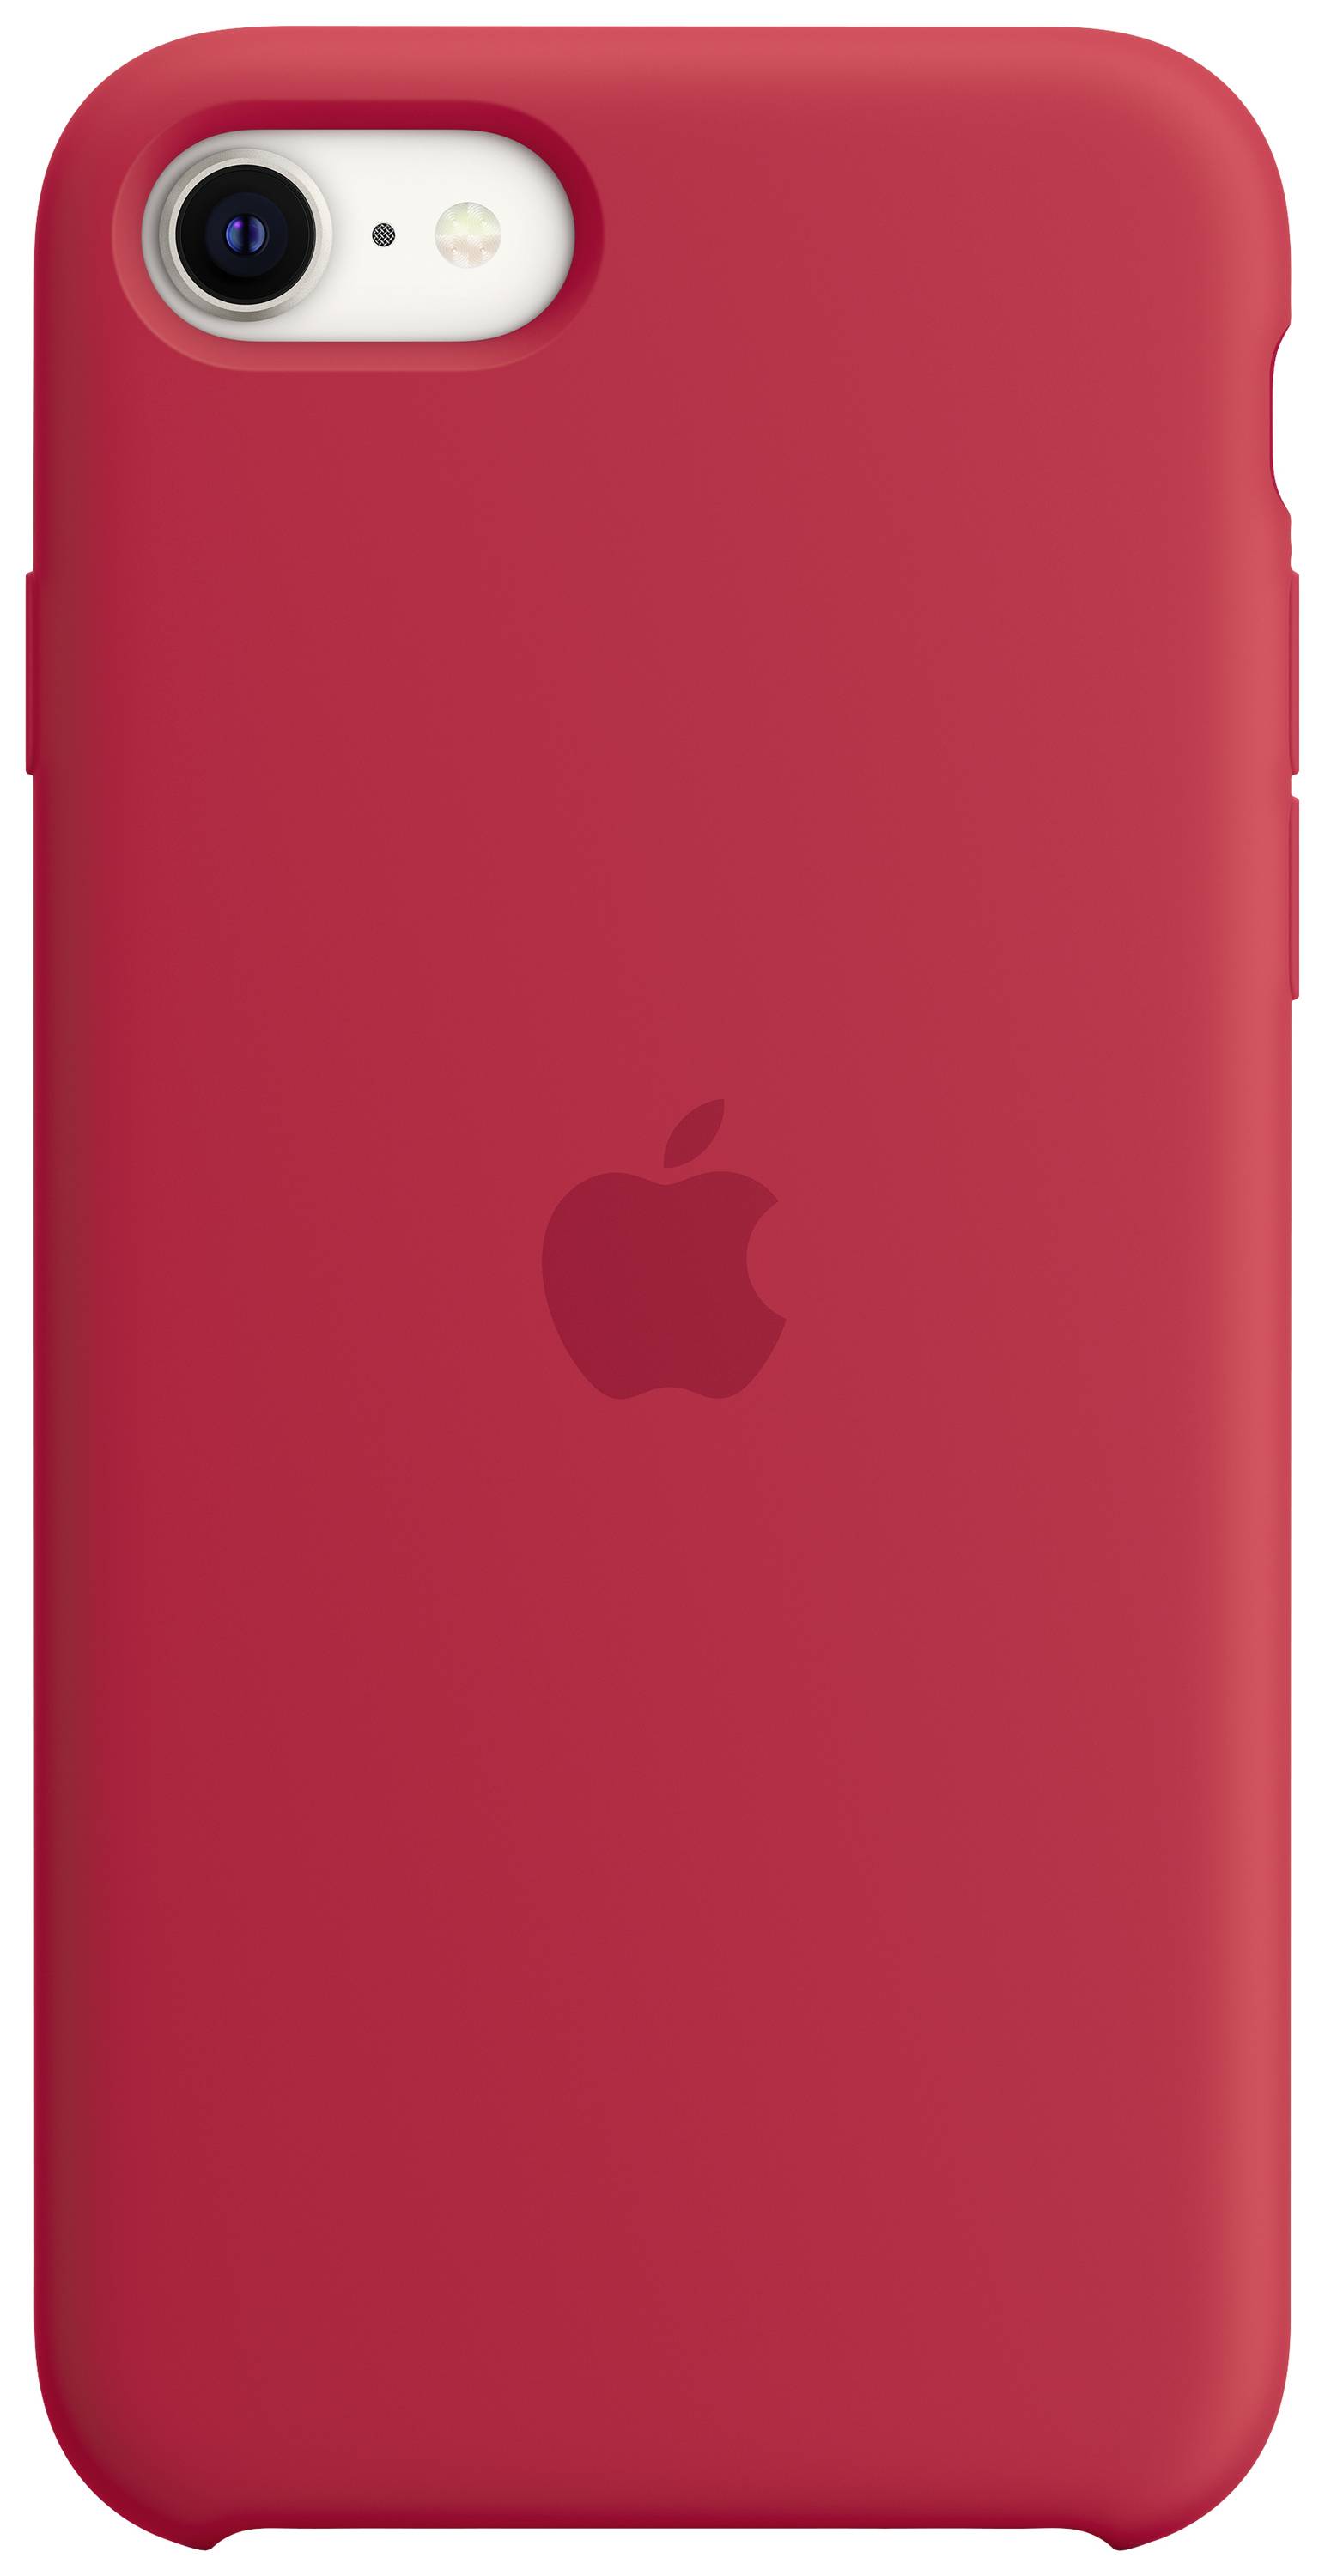 APPLE iPhone SE Silicone Case (PRODUCT)RED